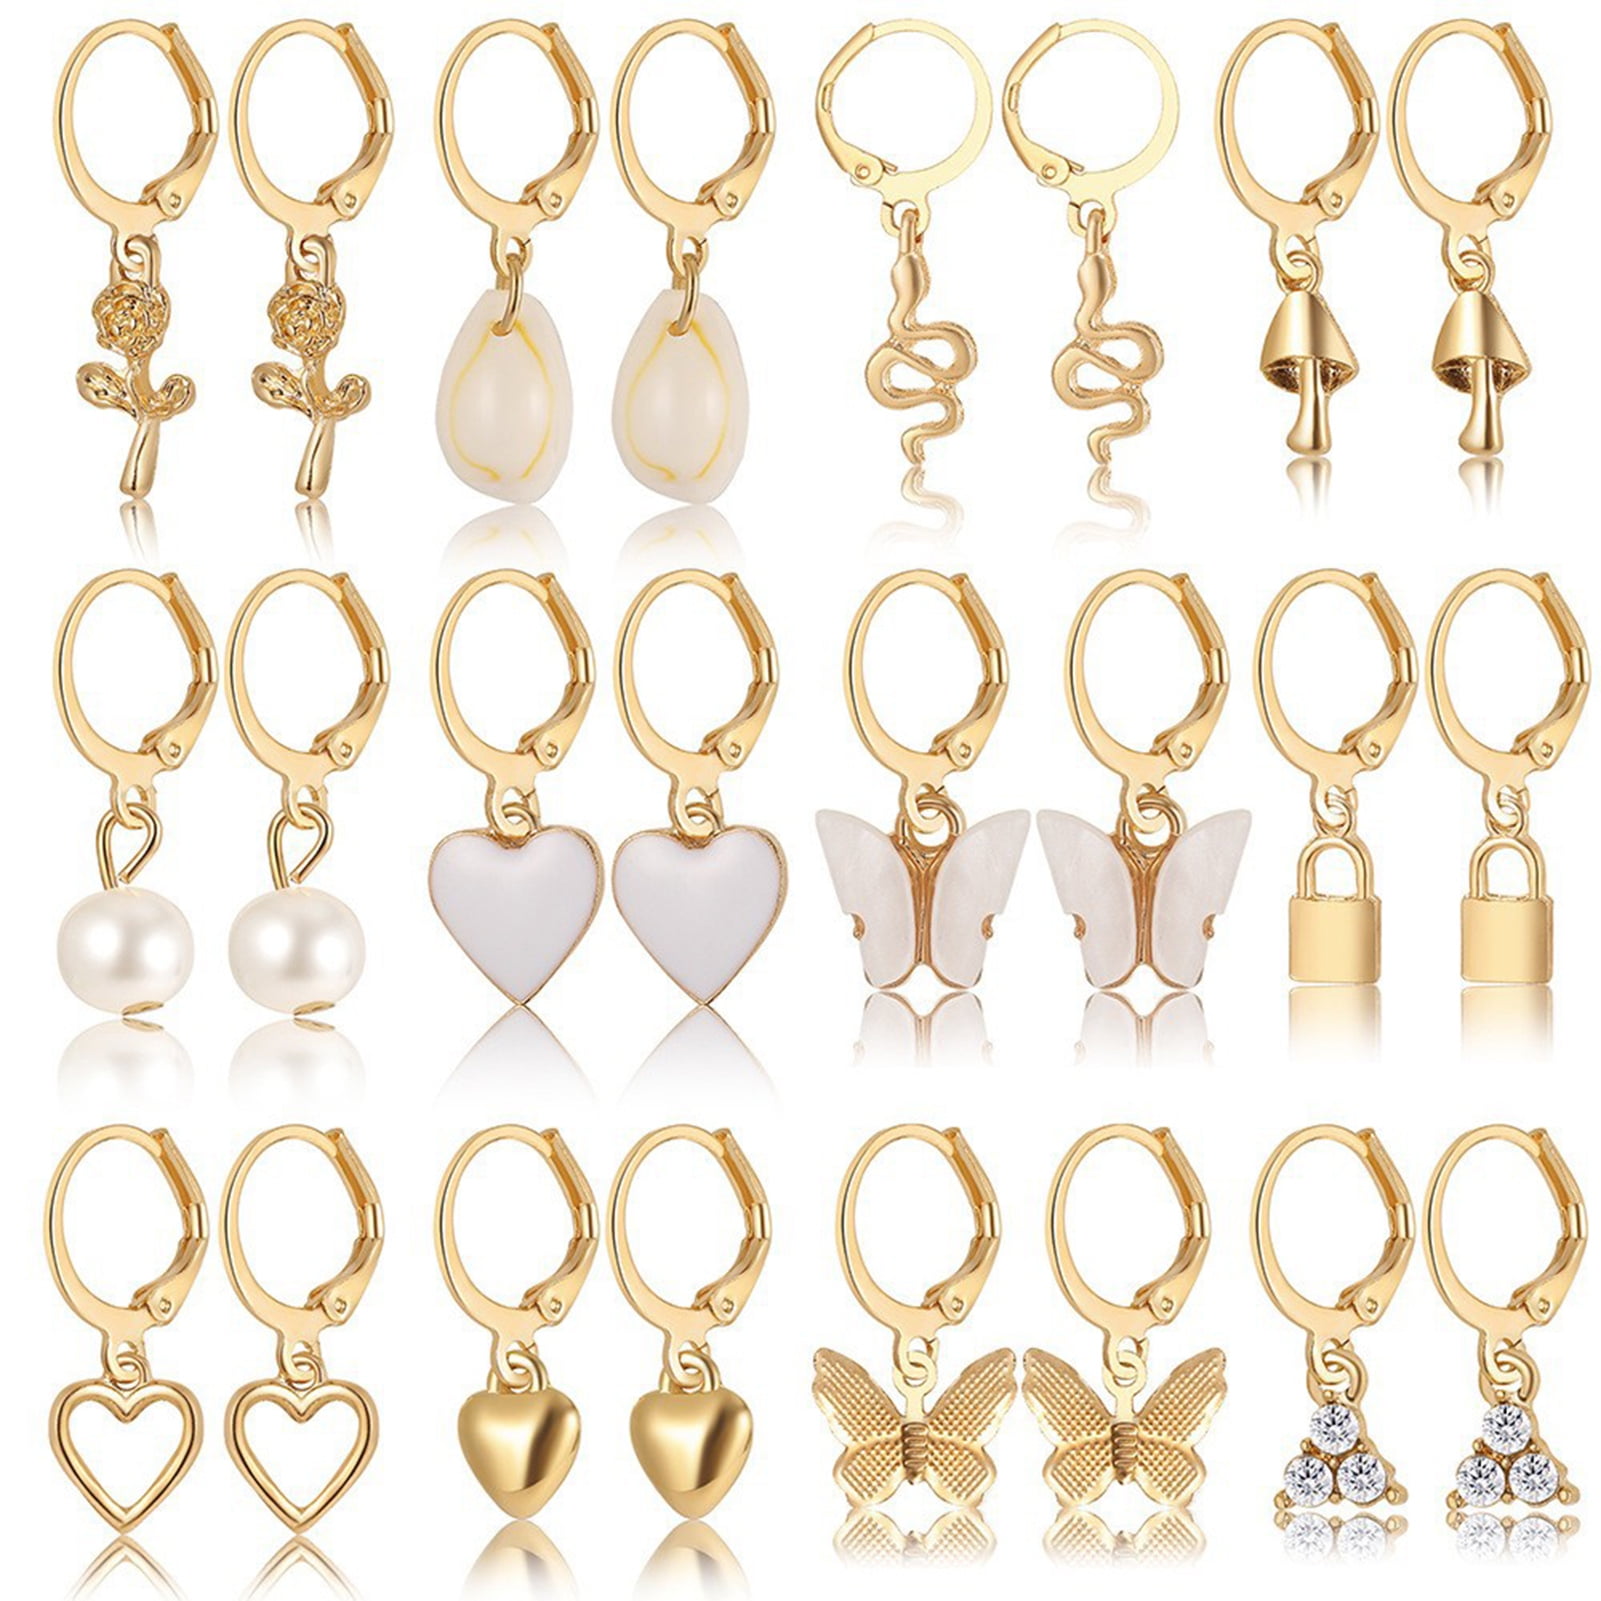 12 Pairs Clip on Earrings Drop Earrings Set Gold Plated Ear Clips Non ...